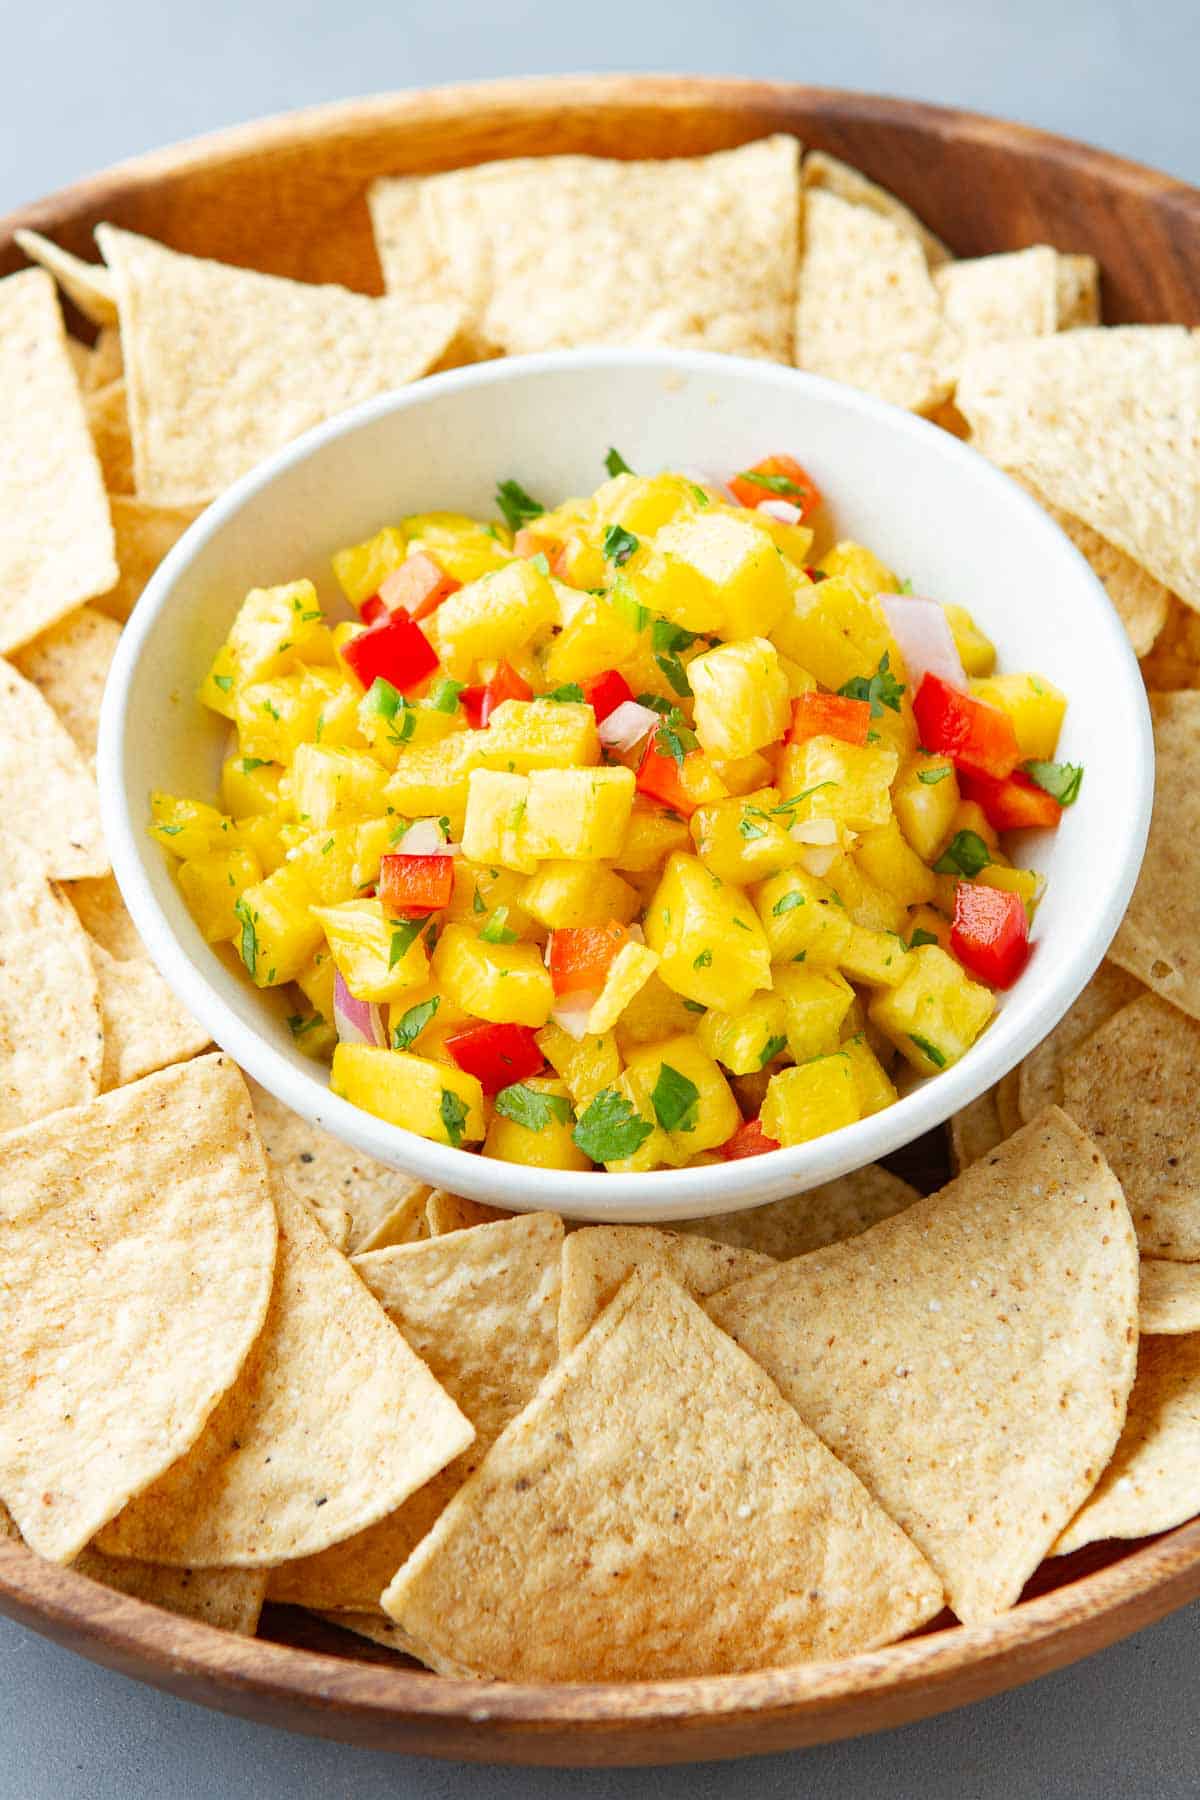 Create a zesty and colorful pineapple mango salsa by mixing together the tangy sweetness of pineapple and mango with a hint of jalapeno heat. Use it as a dip, a taco topping, or a marinade for grilled fish or chicken.